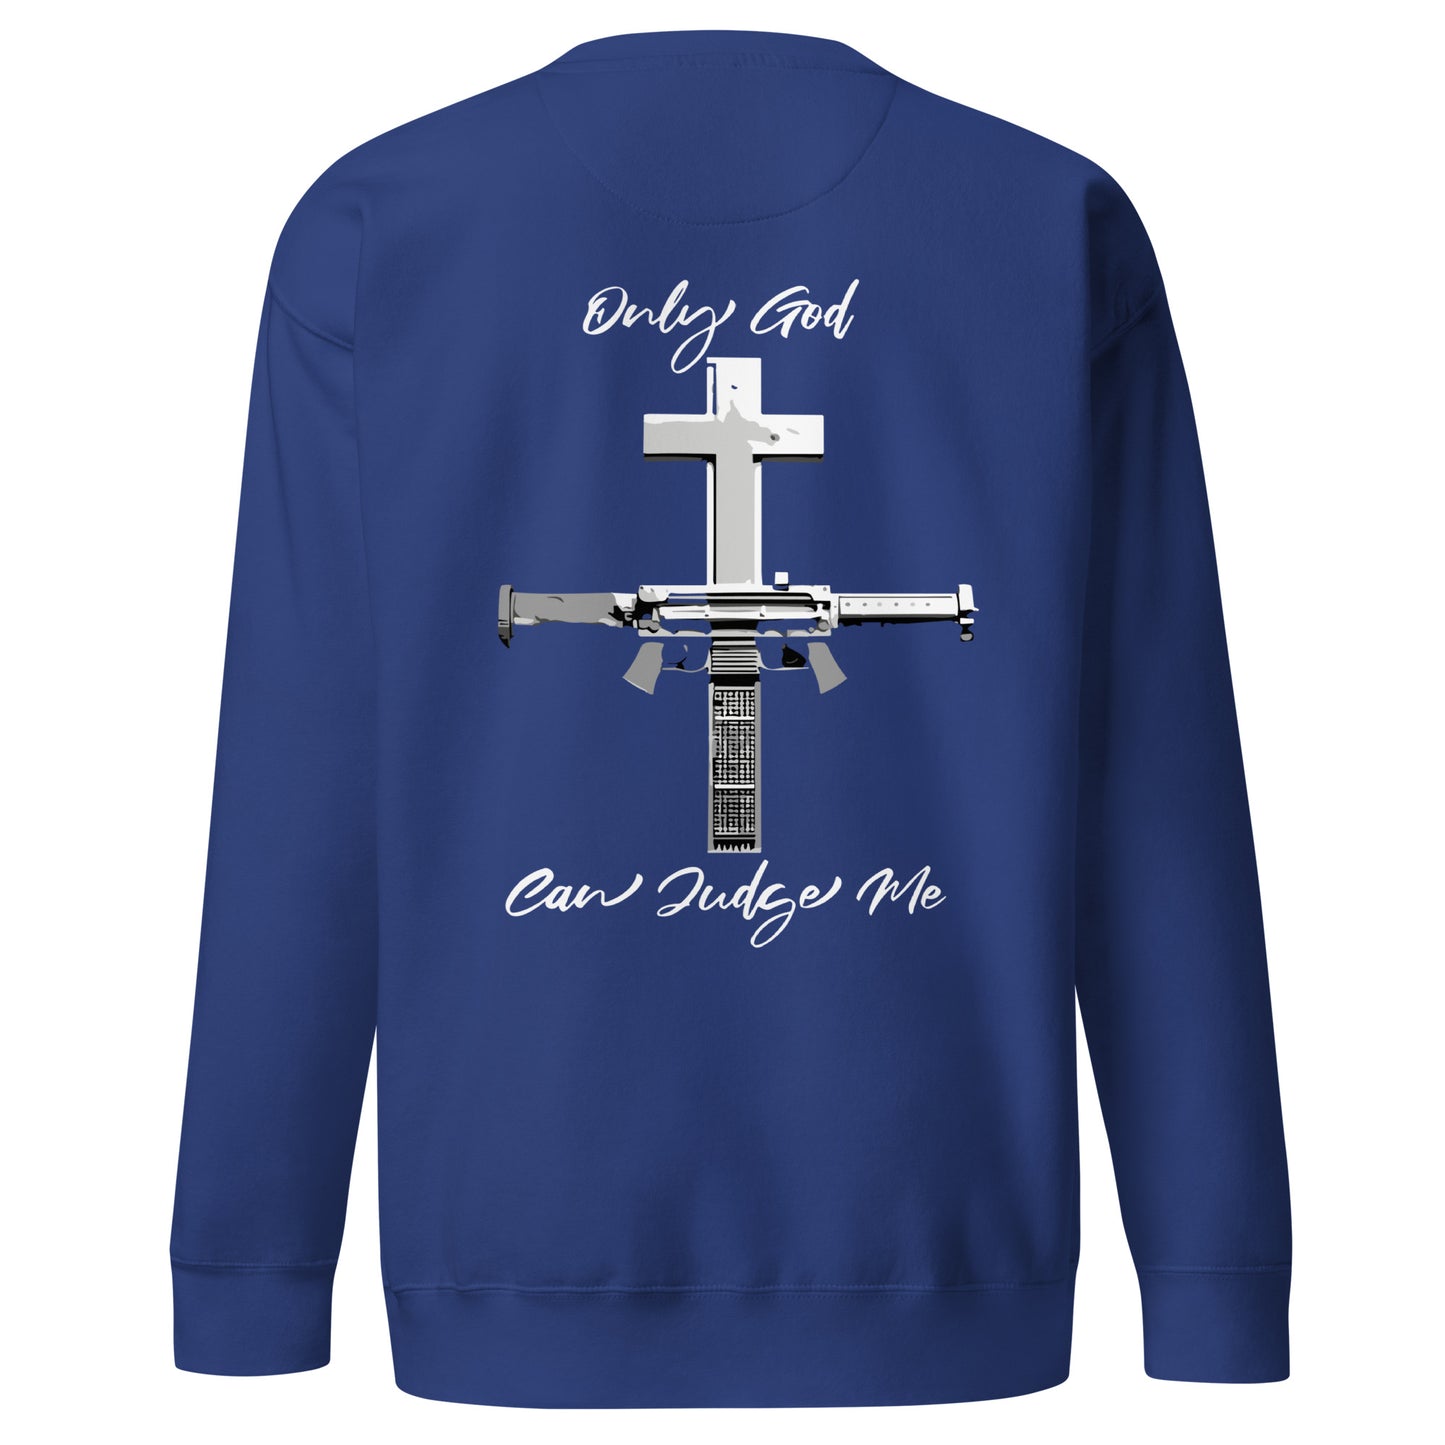 Only God Can Judge Me Sweatshirt - GFTD MNDS